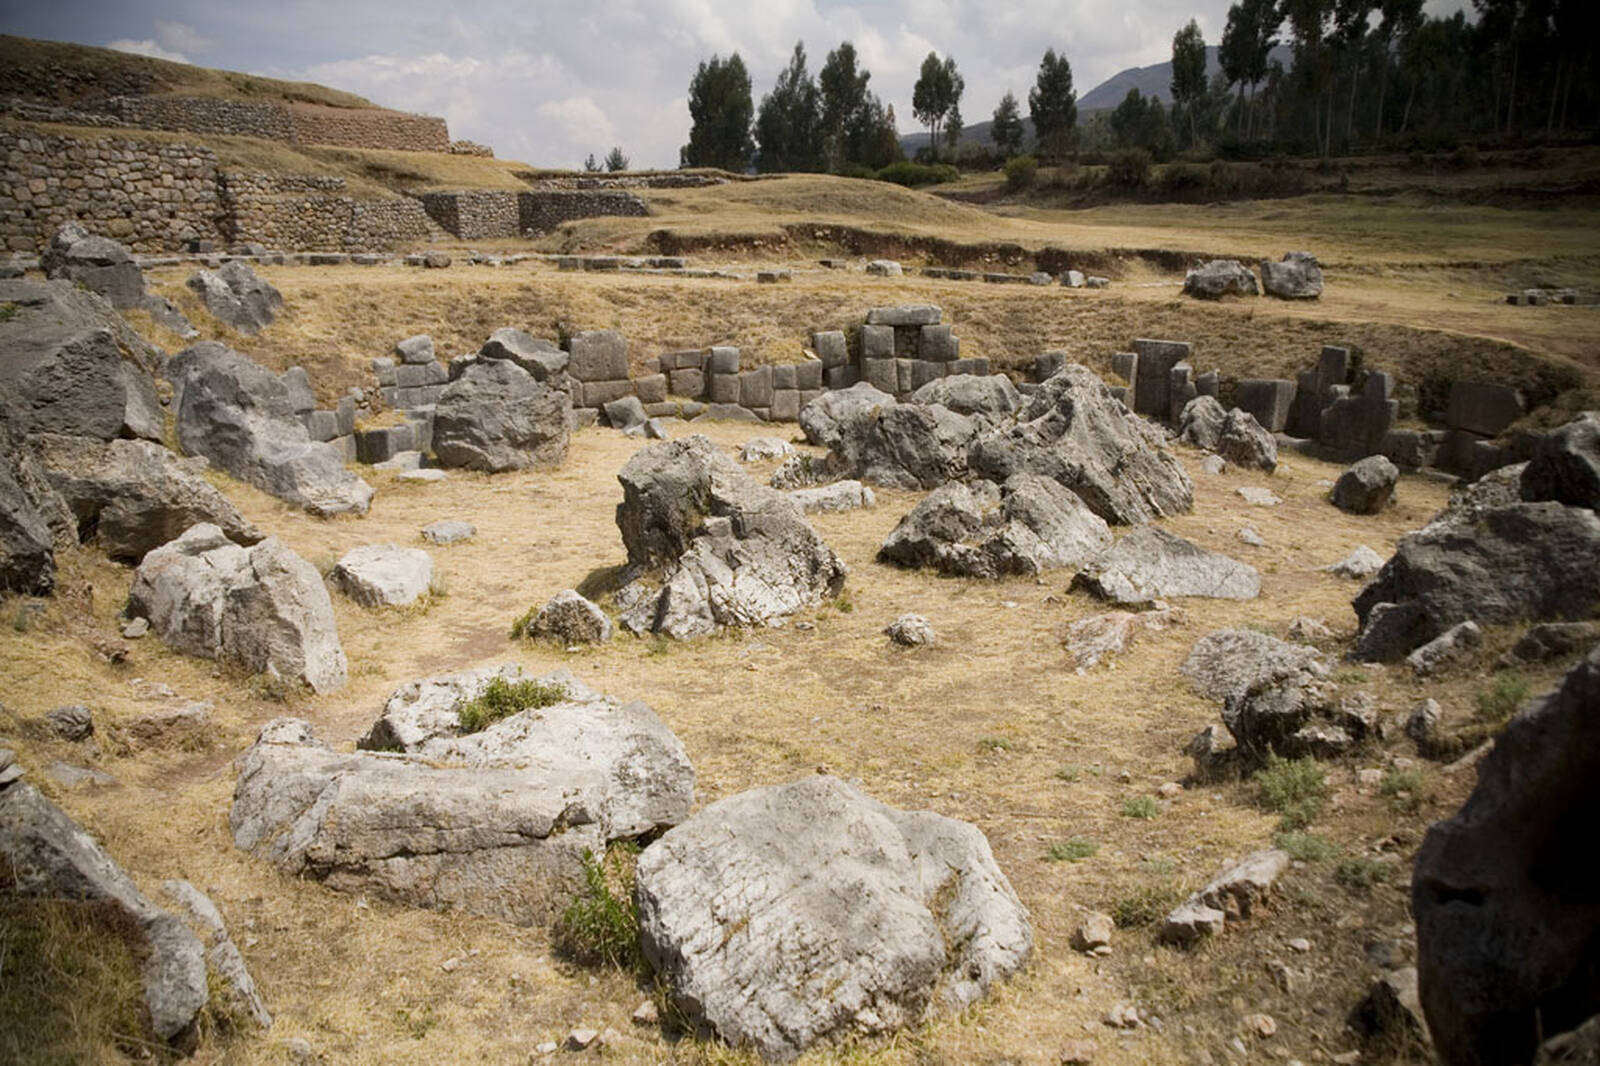 Image of The fortress of Sacsayhuaman by Darlene Hildebrandt